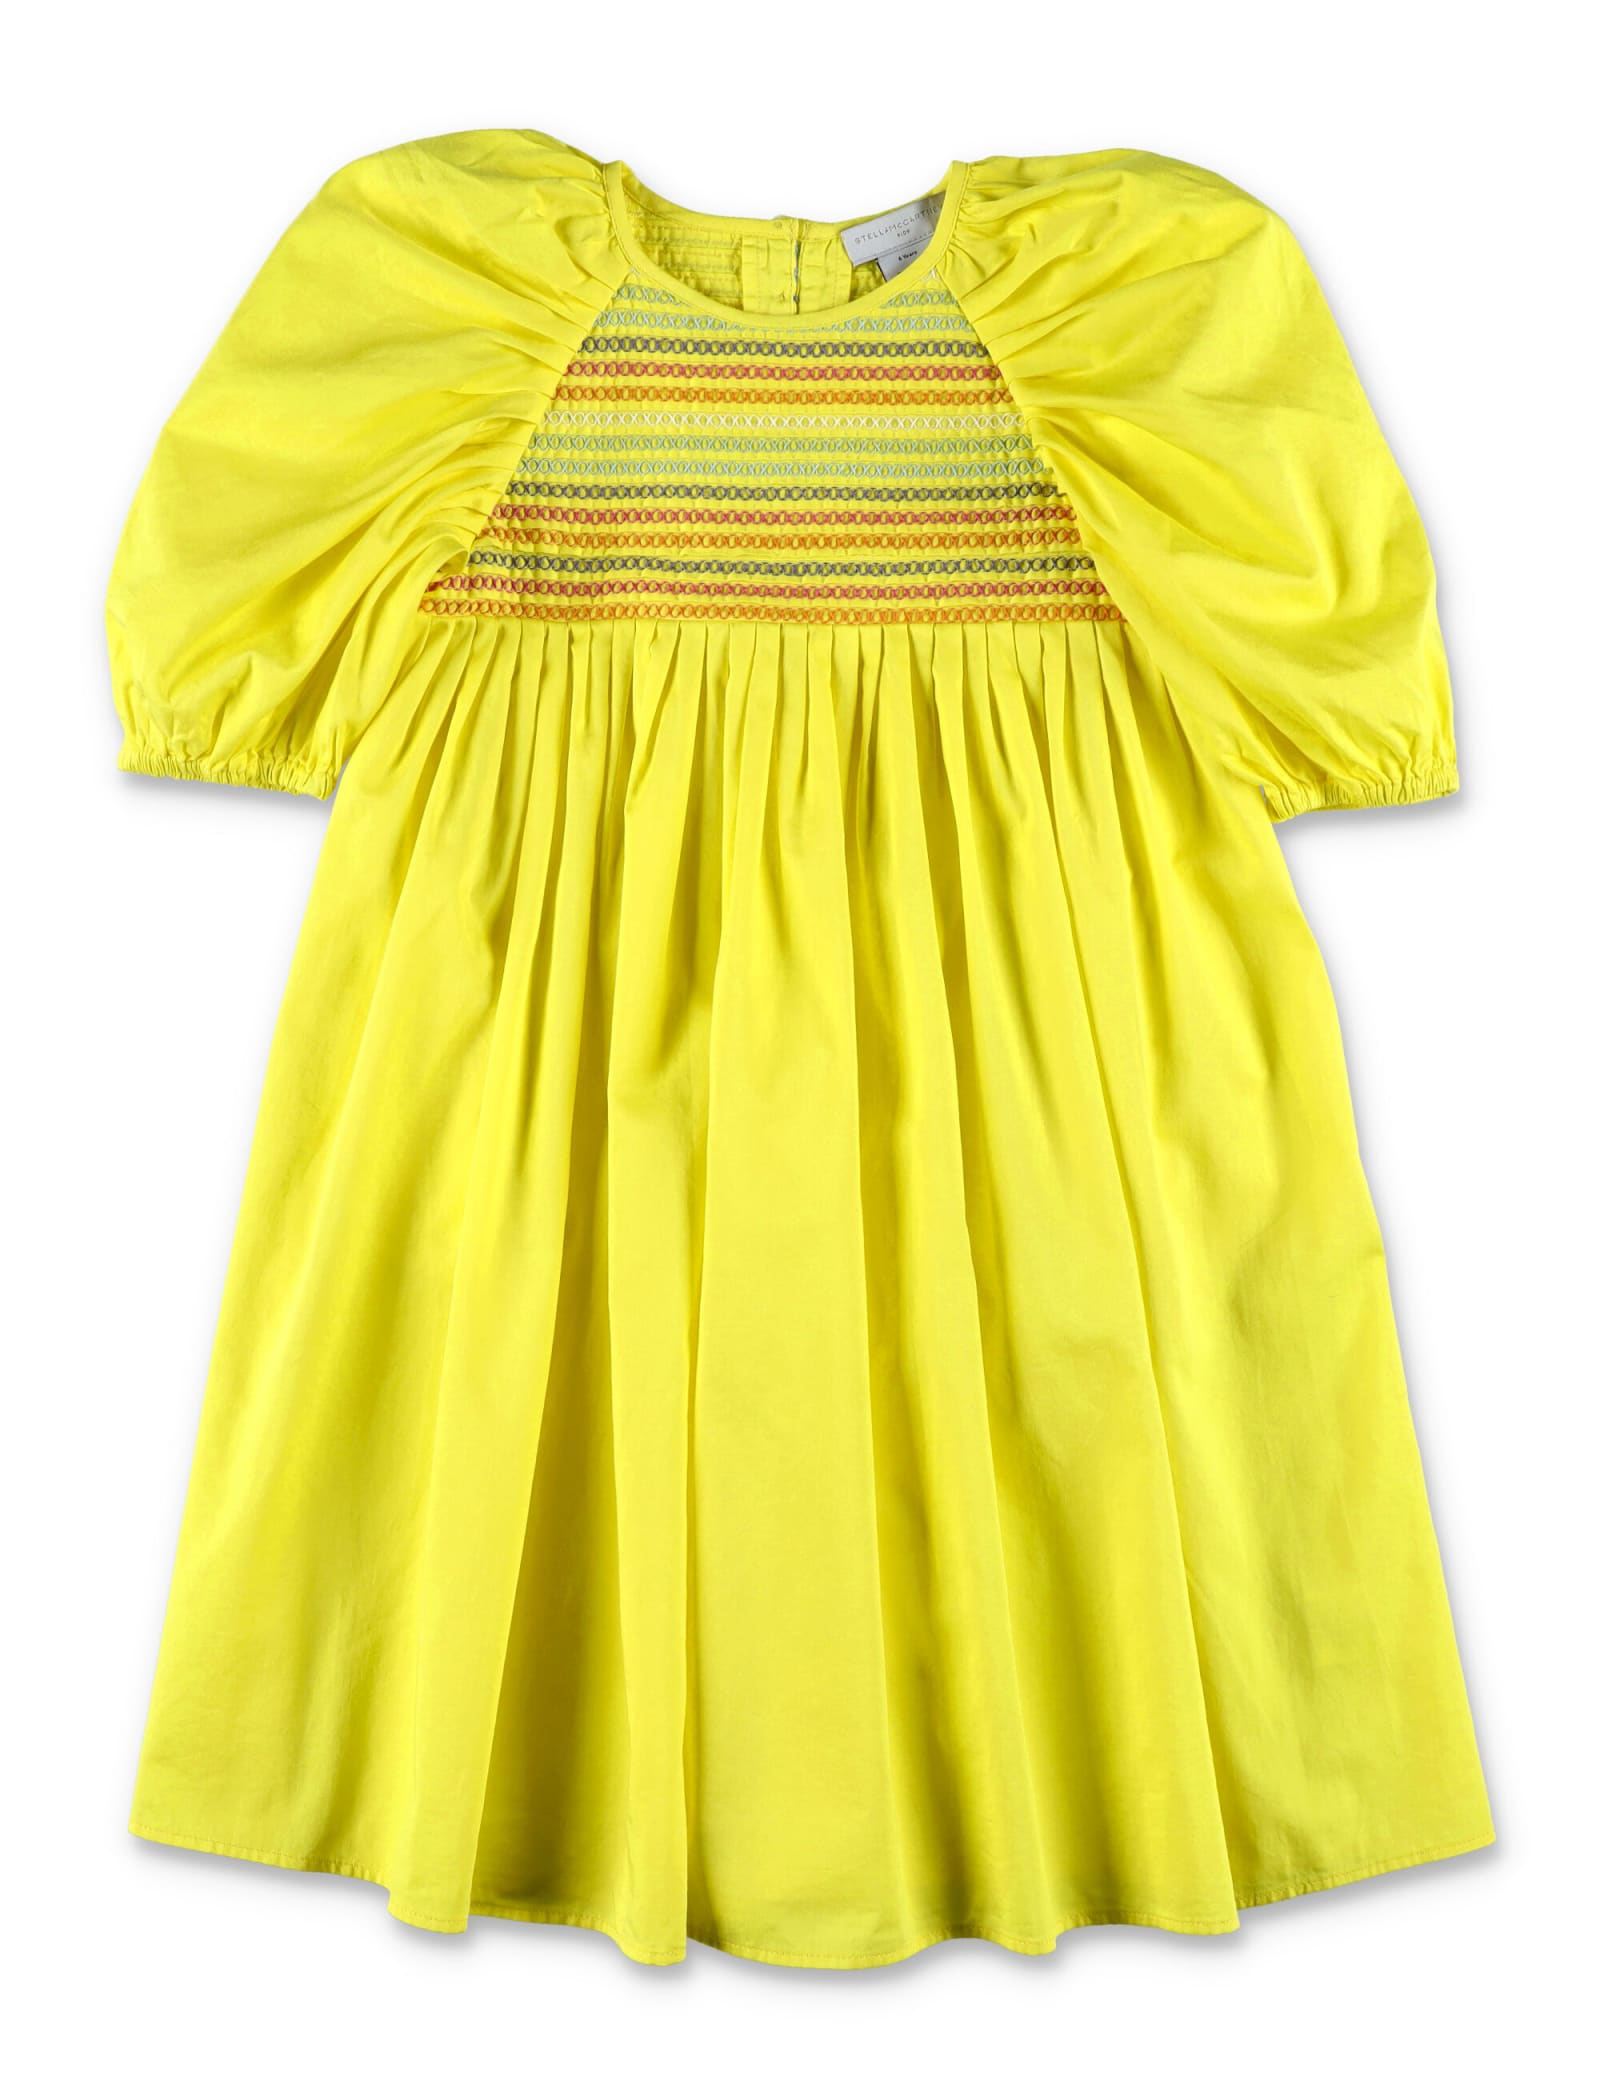 STELLA MCCARTNEY COTTON DRESS WITH EMBROIDERIES